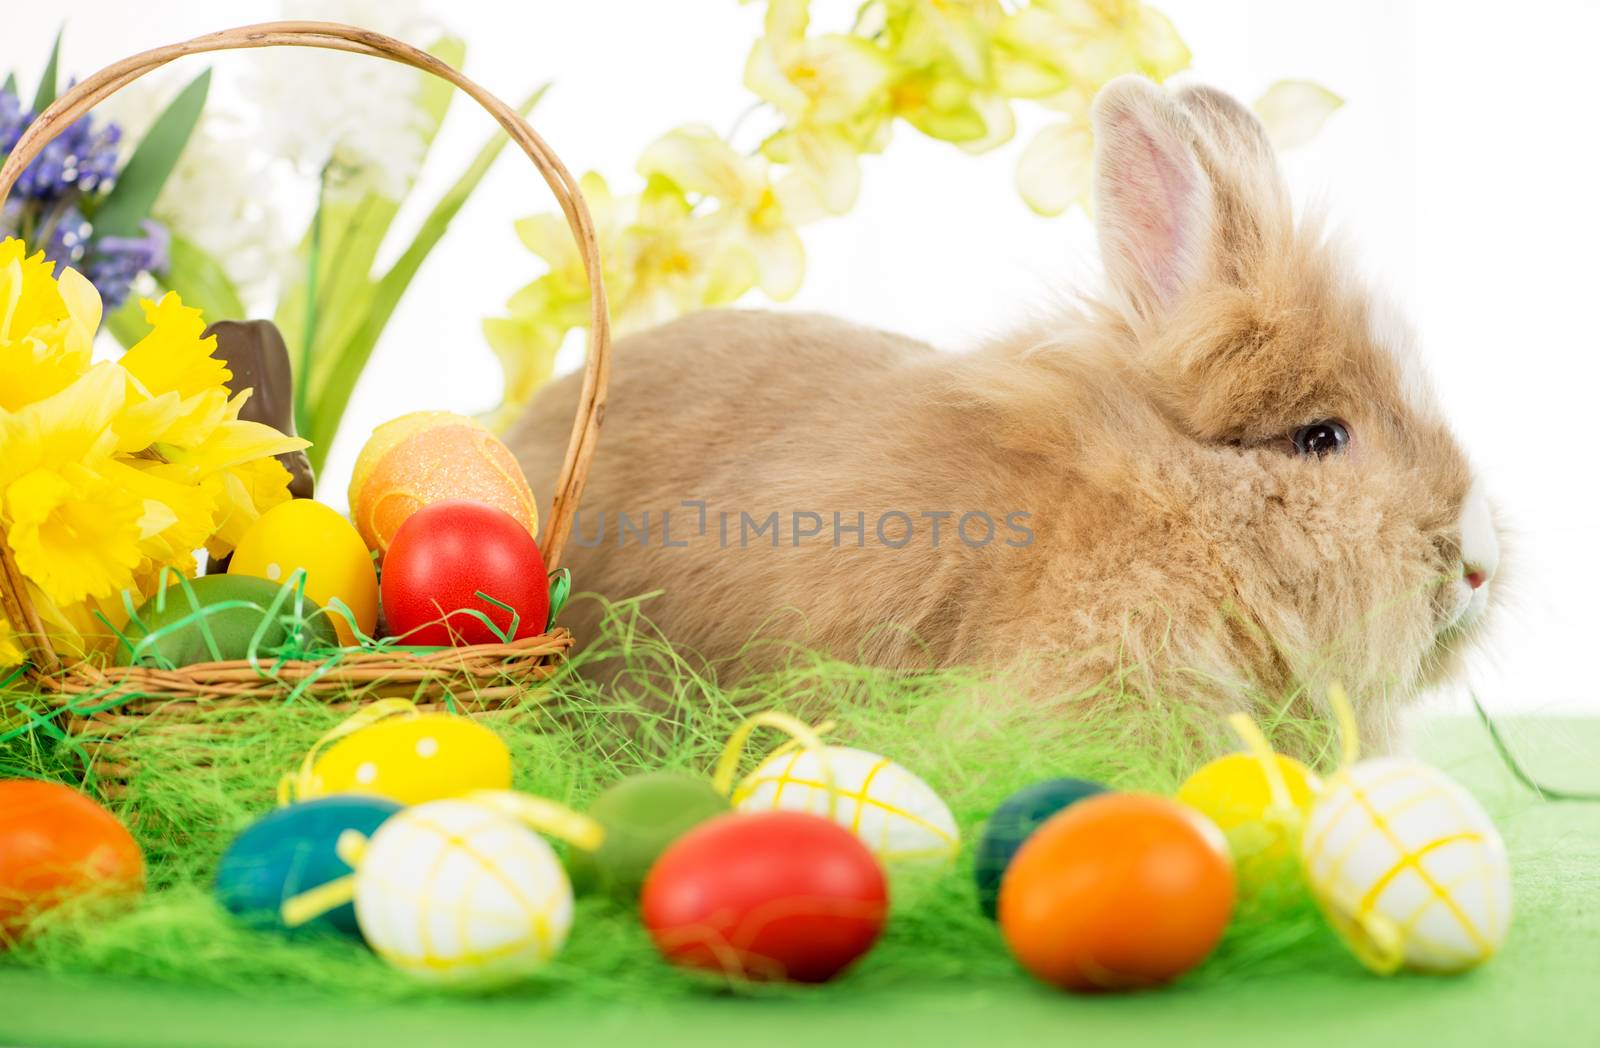 Easter Bunny by MilanMarkovic78